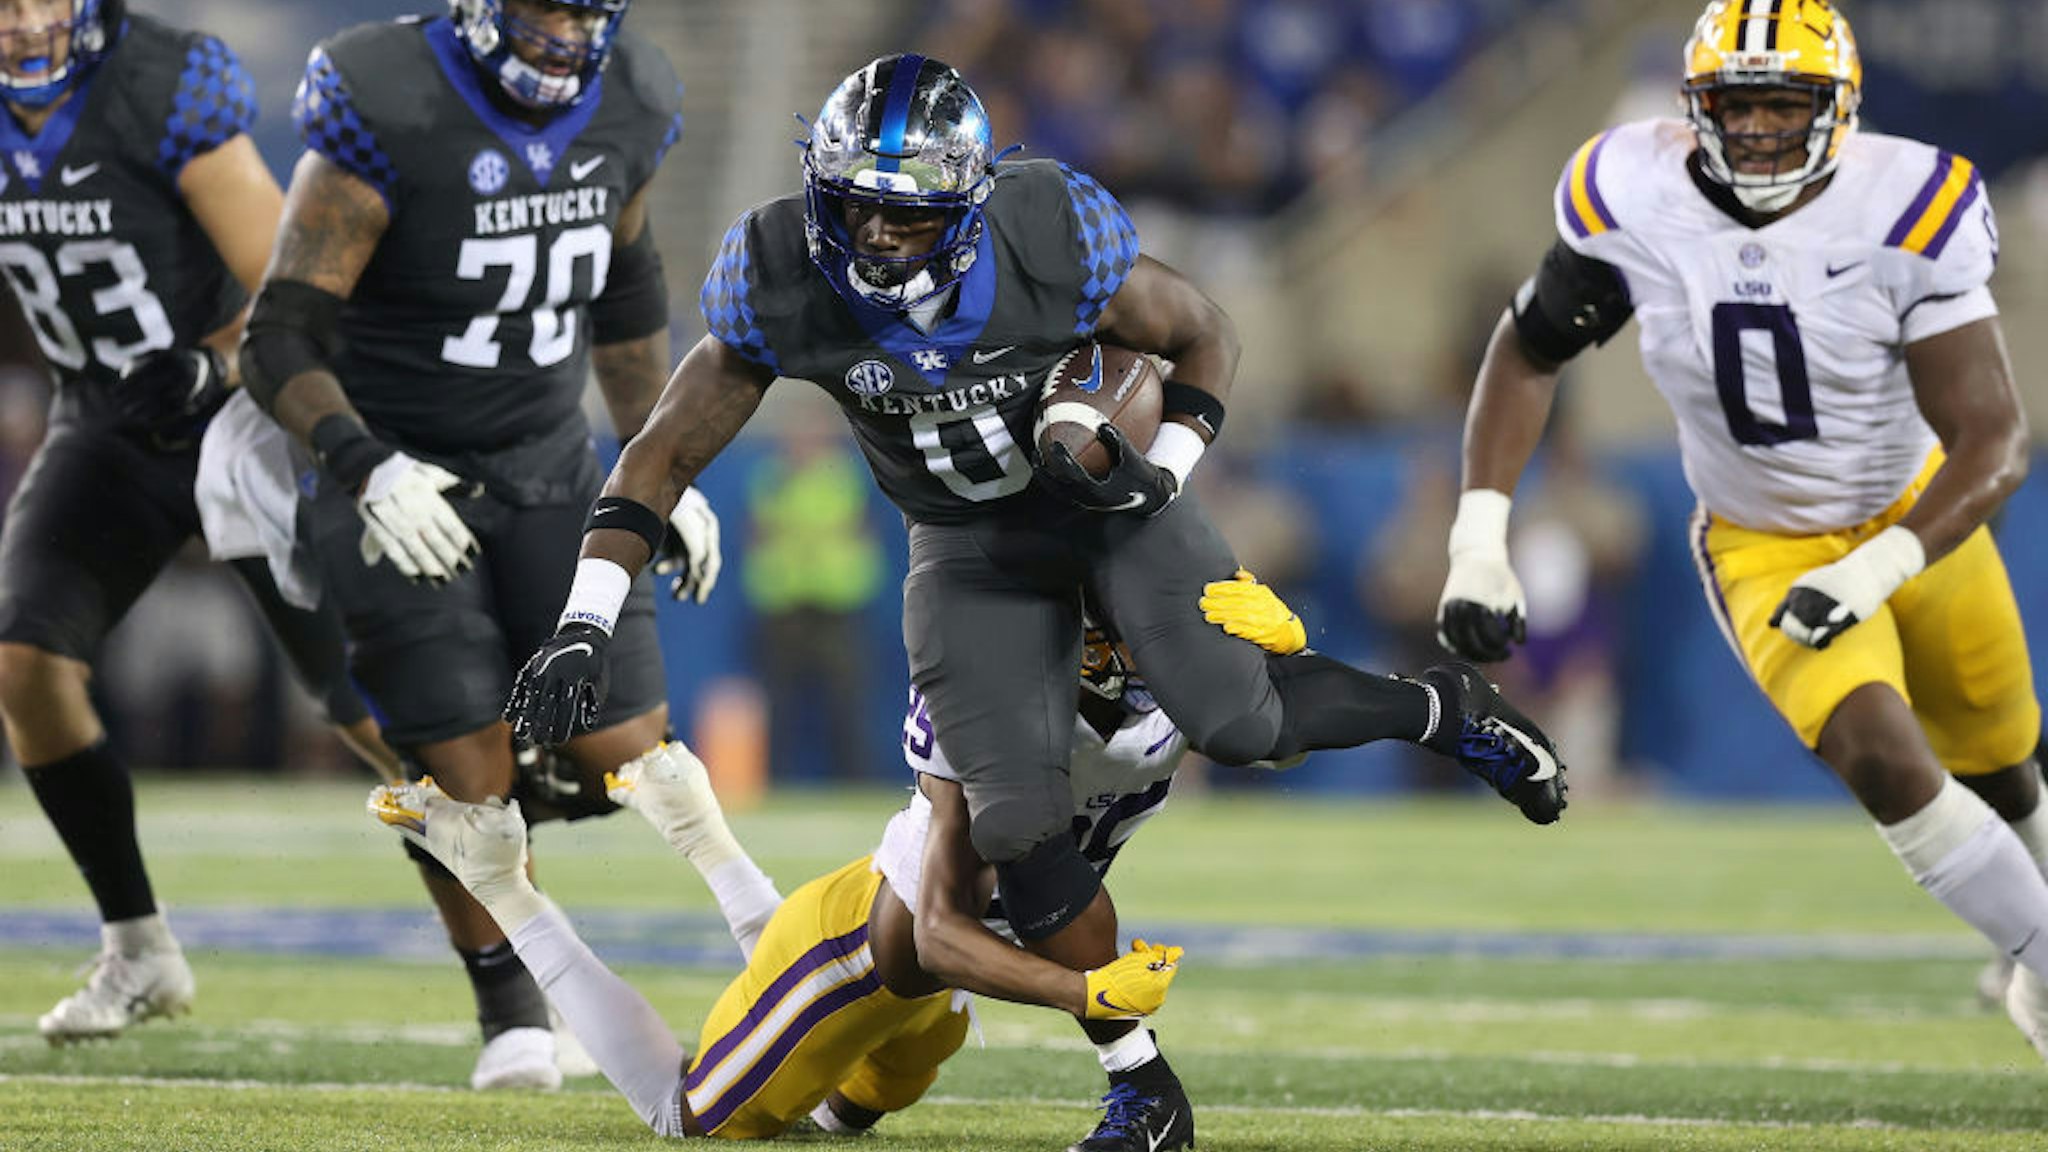 LEXINGTON, KENTUCKY - OCTOBER 09: Kavosiey Smoke #0 of the Kentucky Wildcats runs with the ball against the LSU Tigers at Kroger Field on October 09, 2021 in Lexington, Kentucky. (Photo by Andy Lyons/Getty Images)